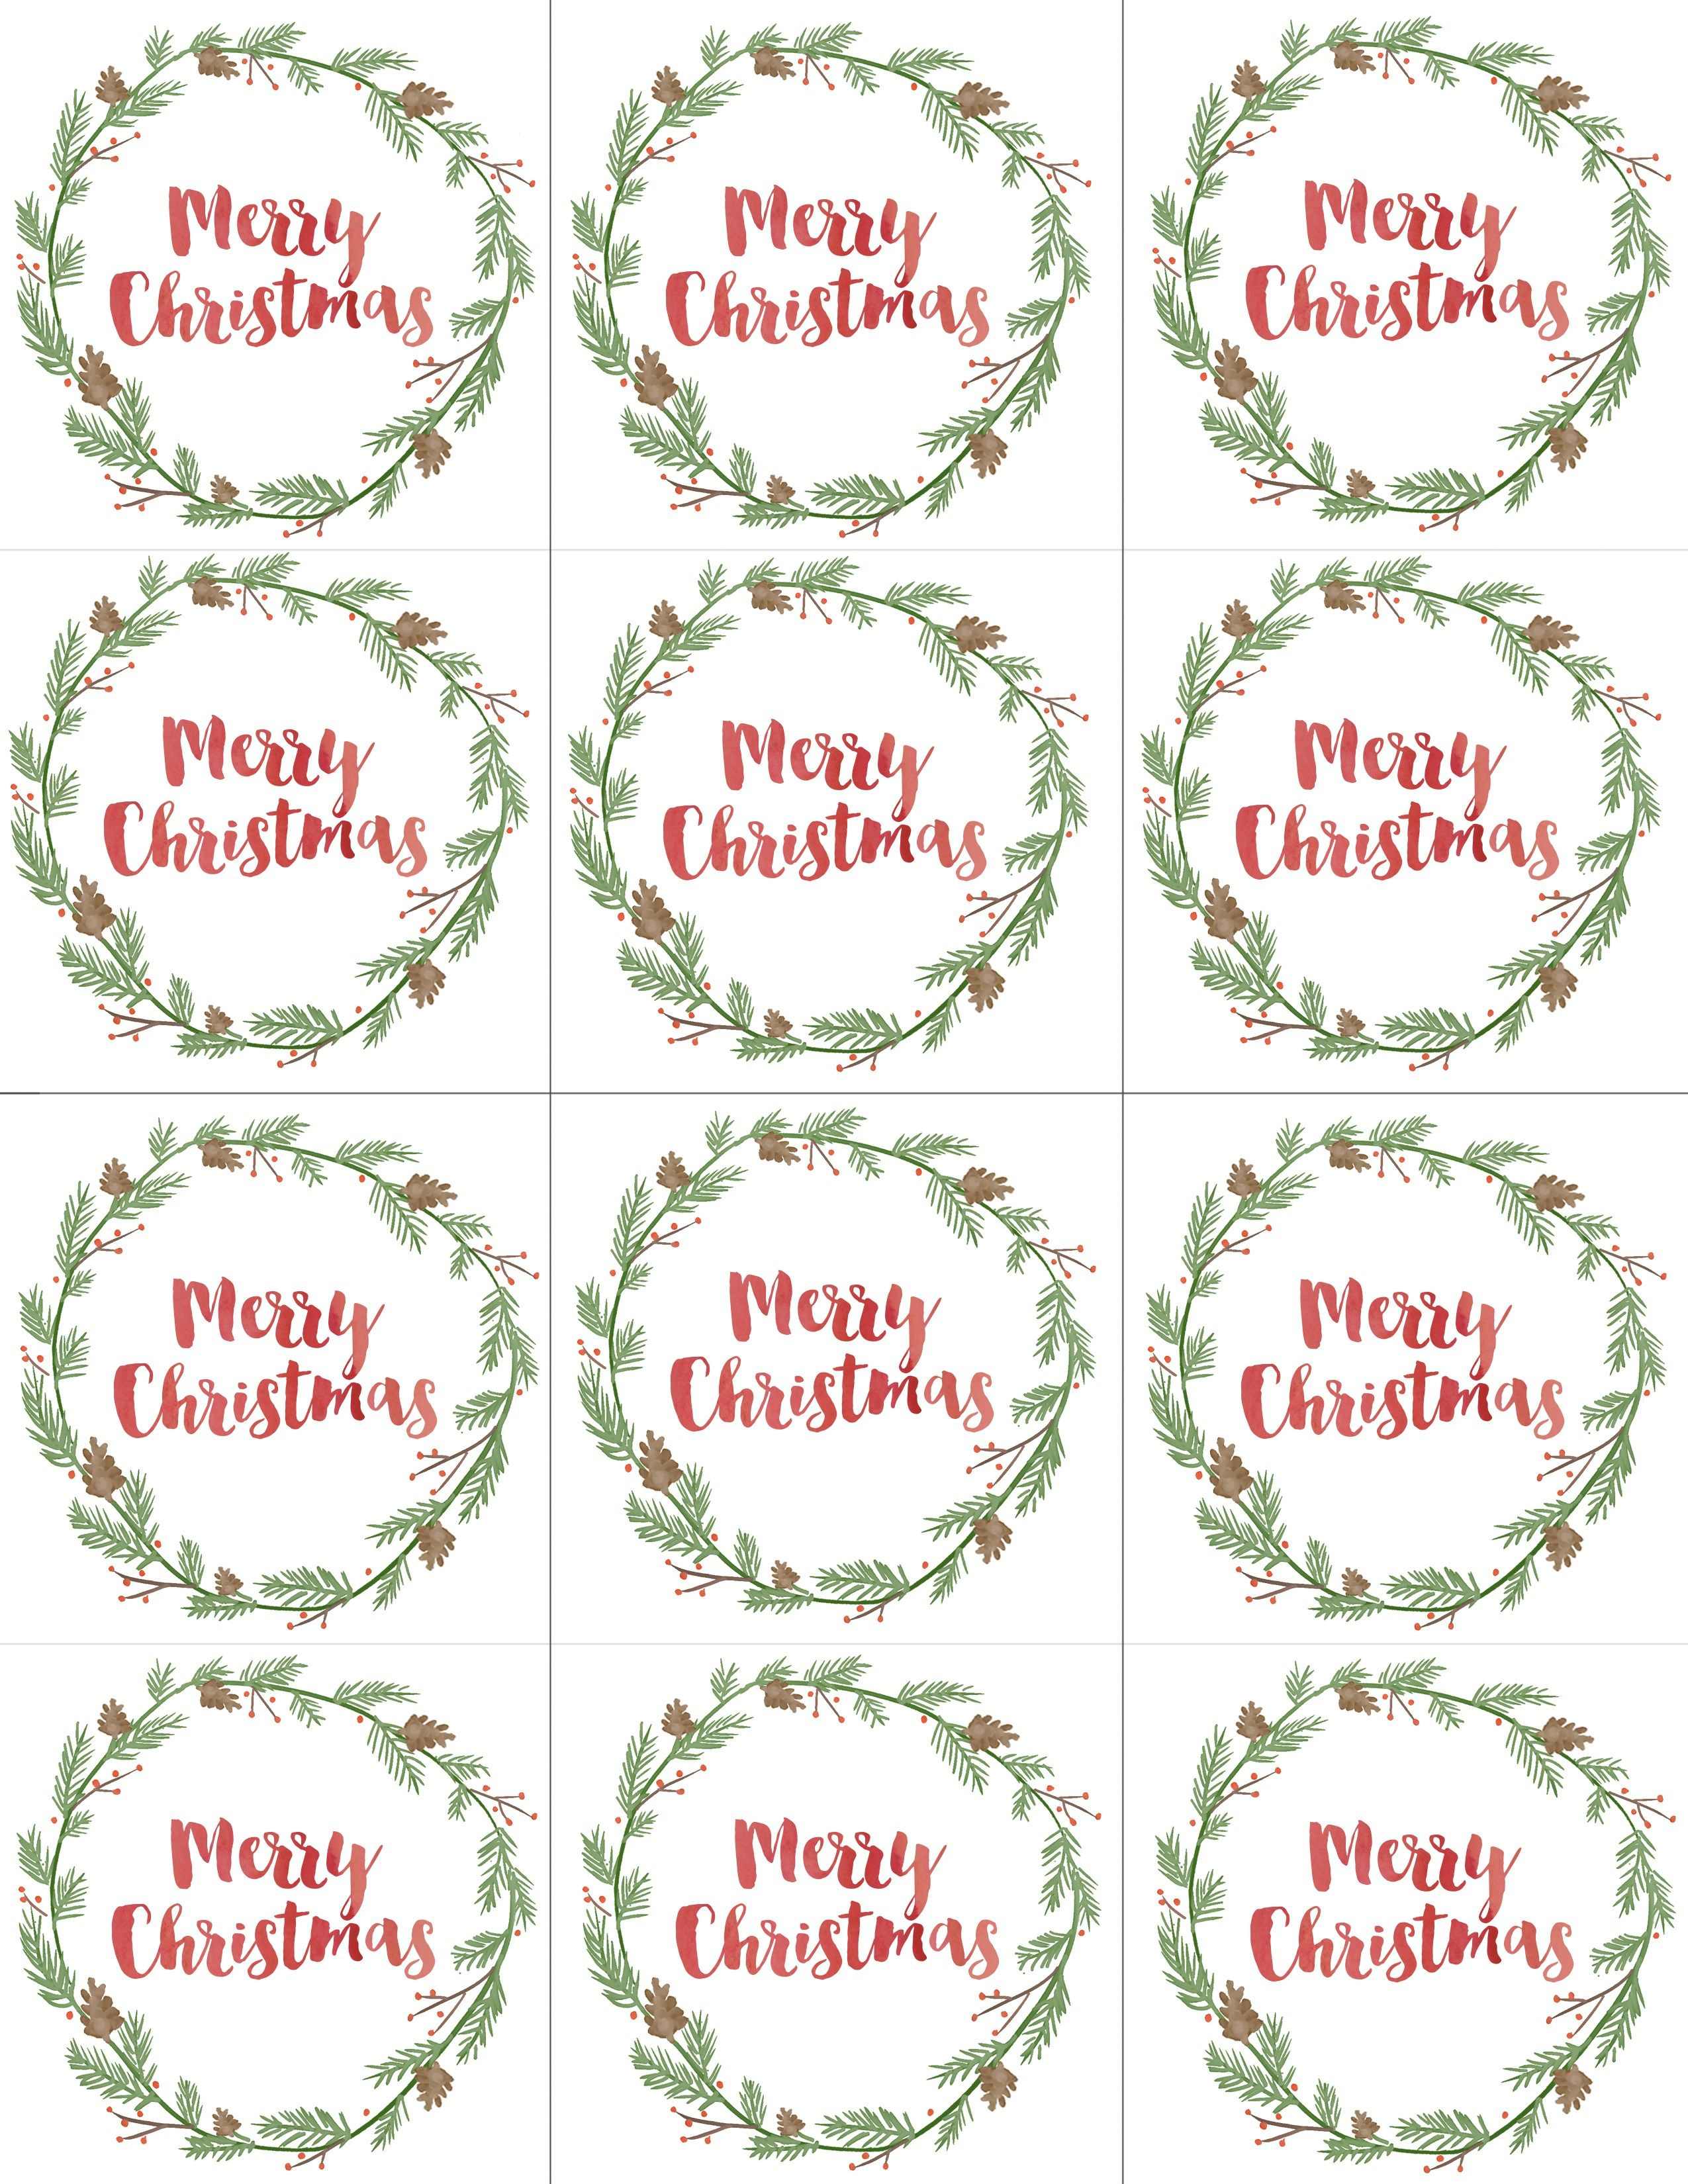 Hand Painted Gift Tags Free Printable | Christmas | Christmas Gift - Free Printable Christmas Pictures